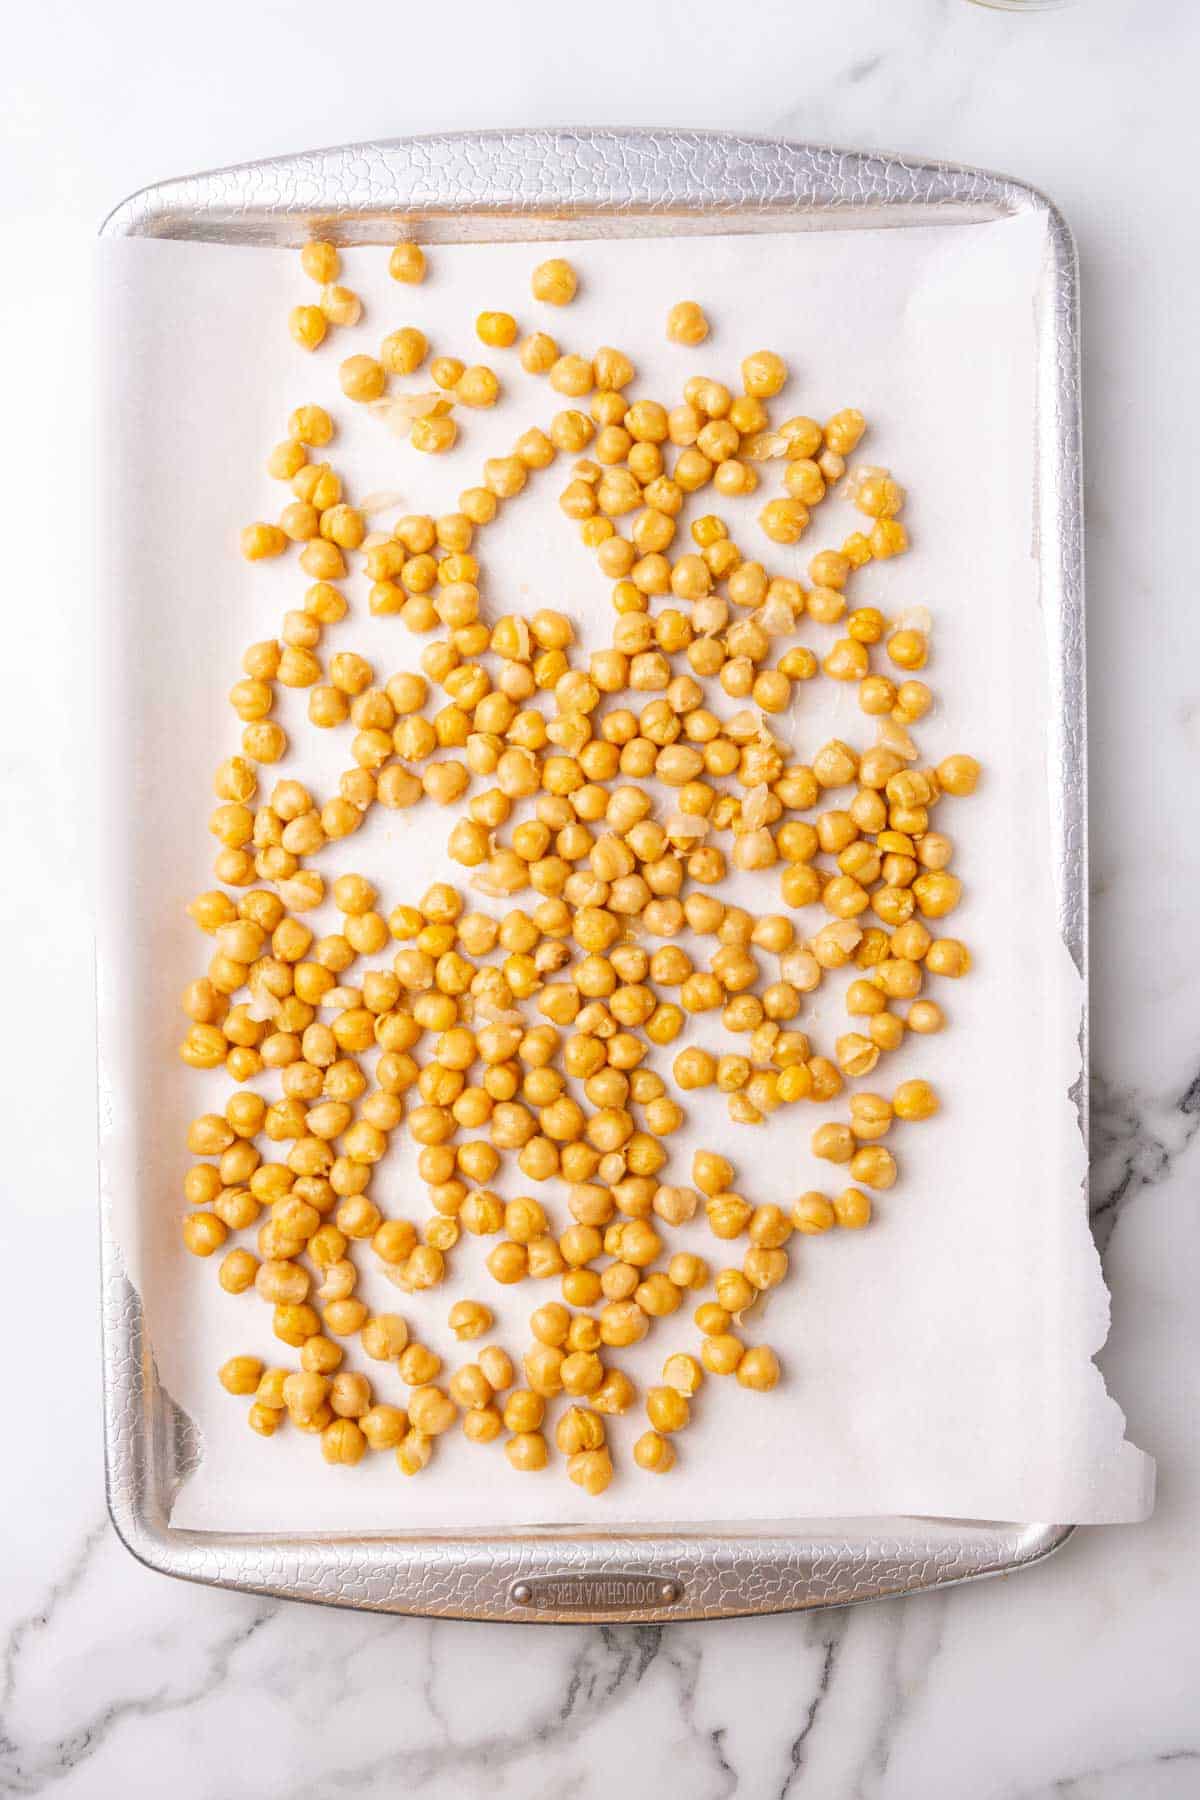 Chickpeas spread out on a baking tray lined with parchment paper, as seen from above on a white marble countertop